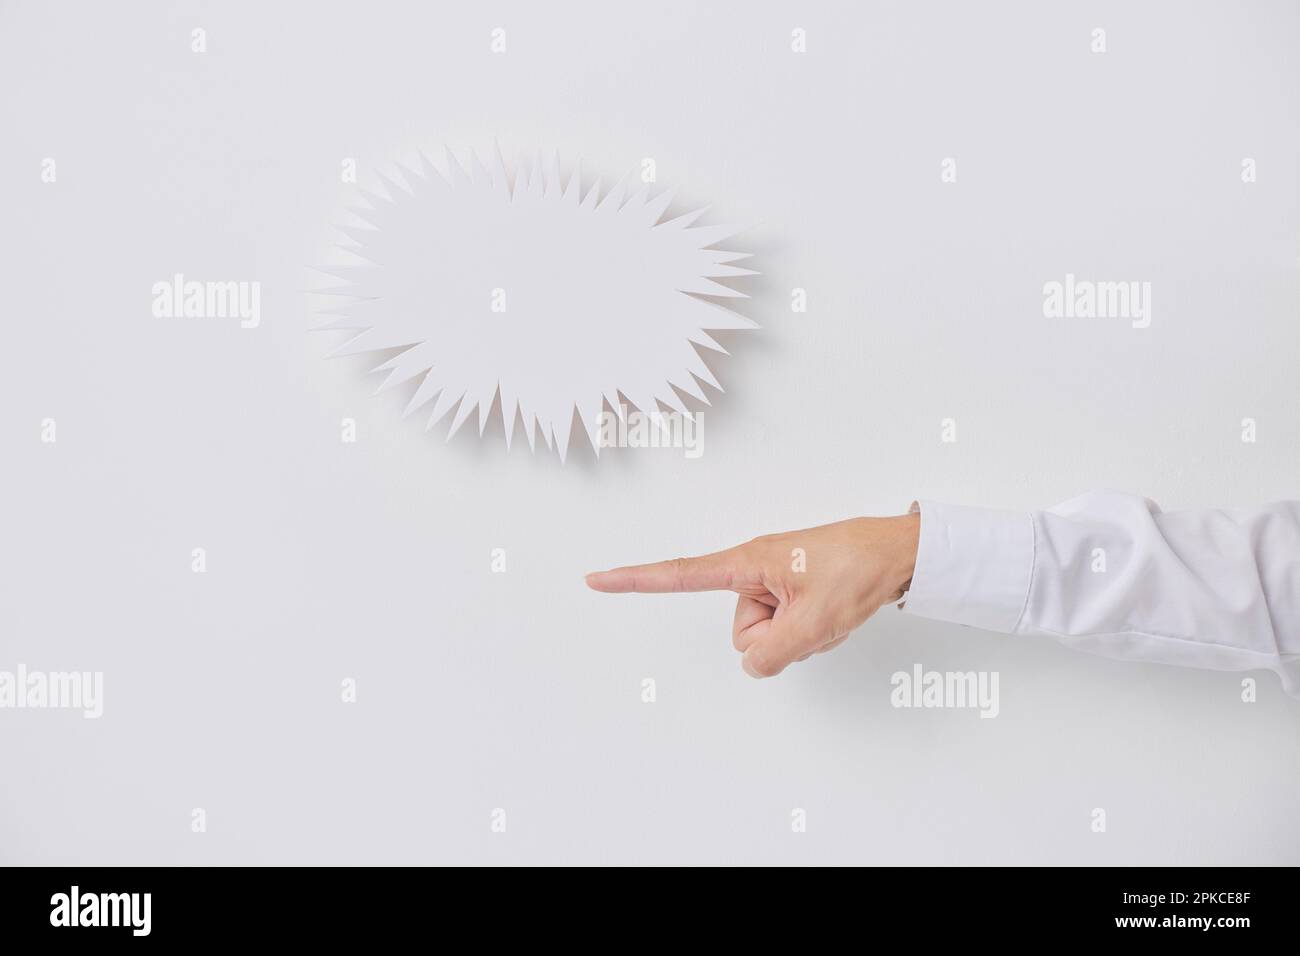 Jagged speech balloon and a person's hand pointing Stock Photo